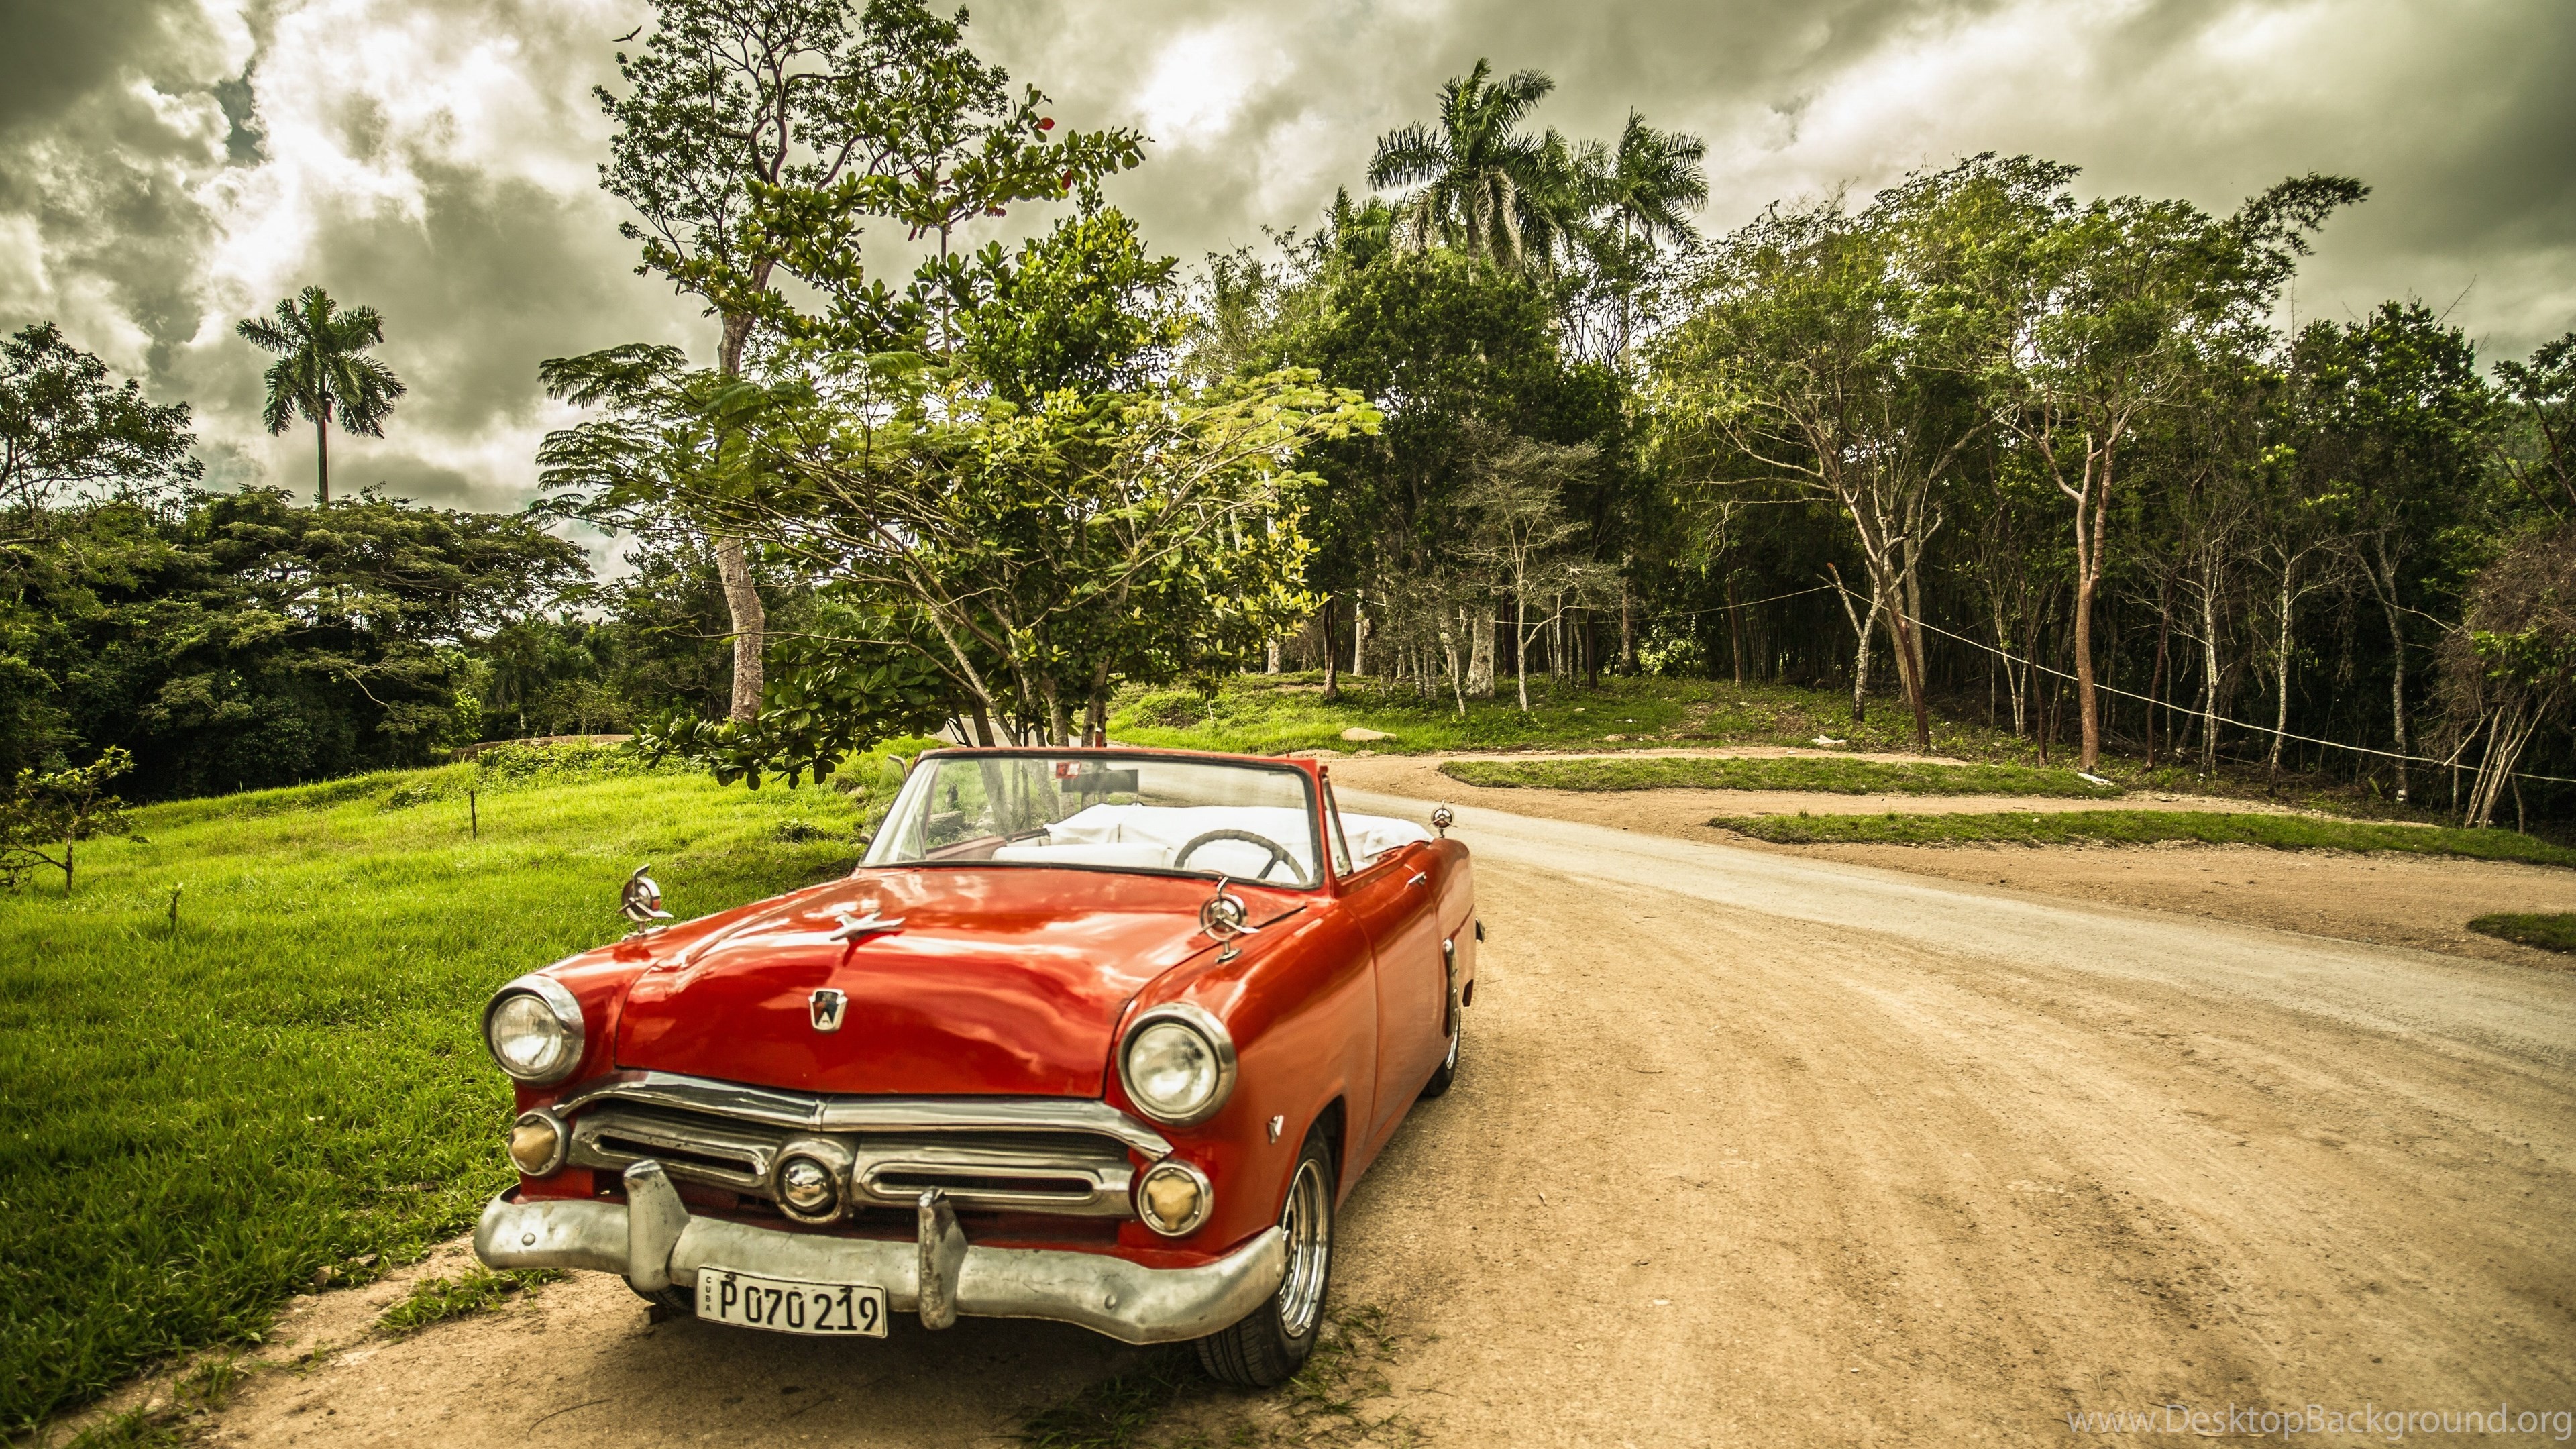 3840x2160 Cuba Old Car Red Forest Wallpapers HD Free Desktop Backgrounds 2016  Download Background